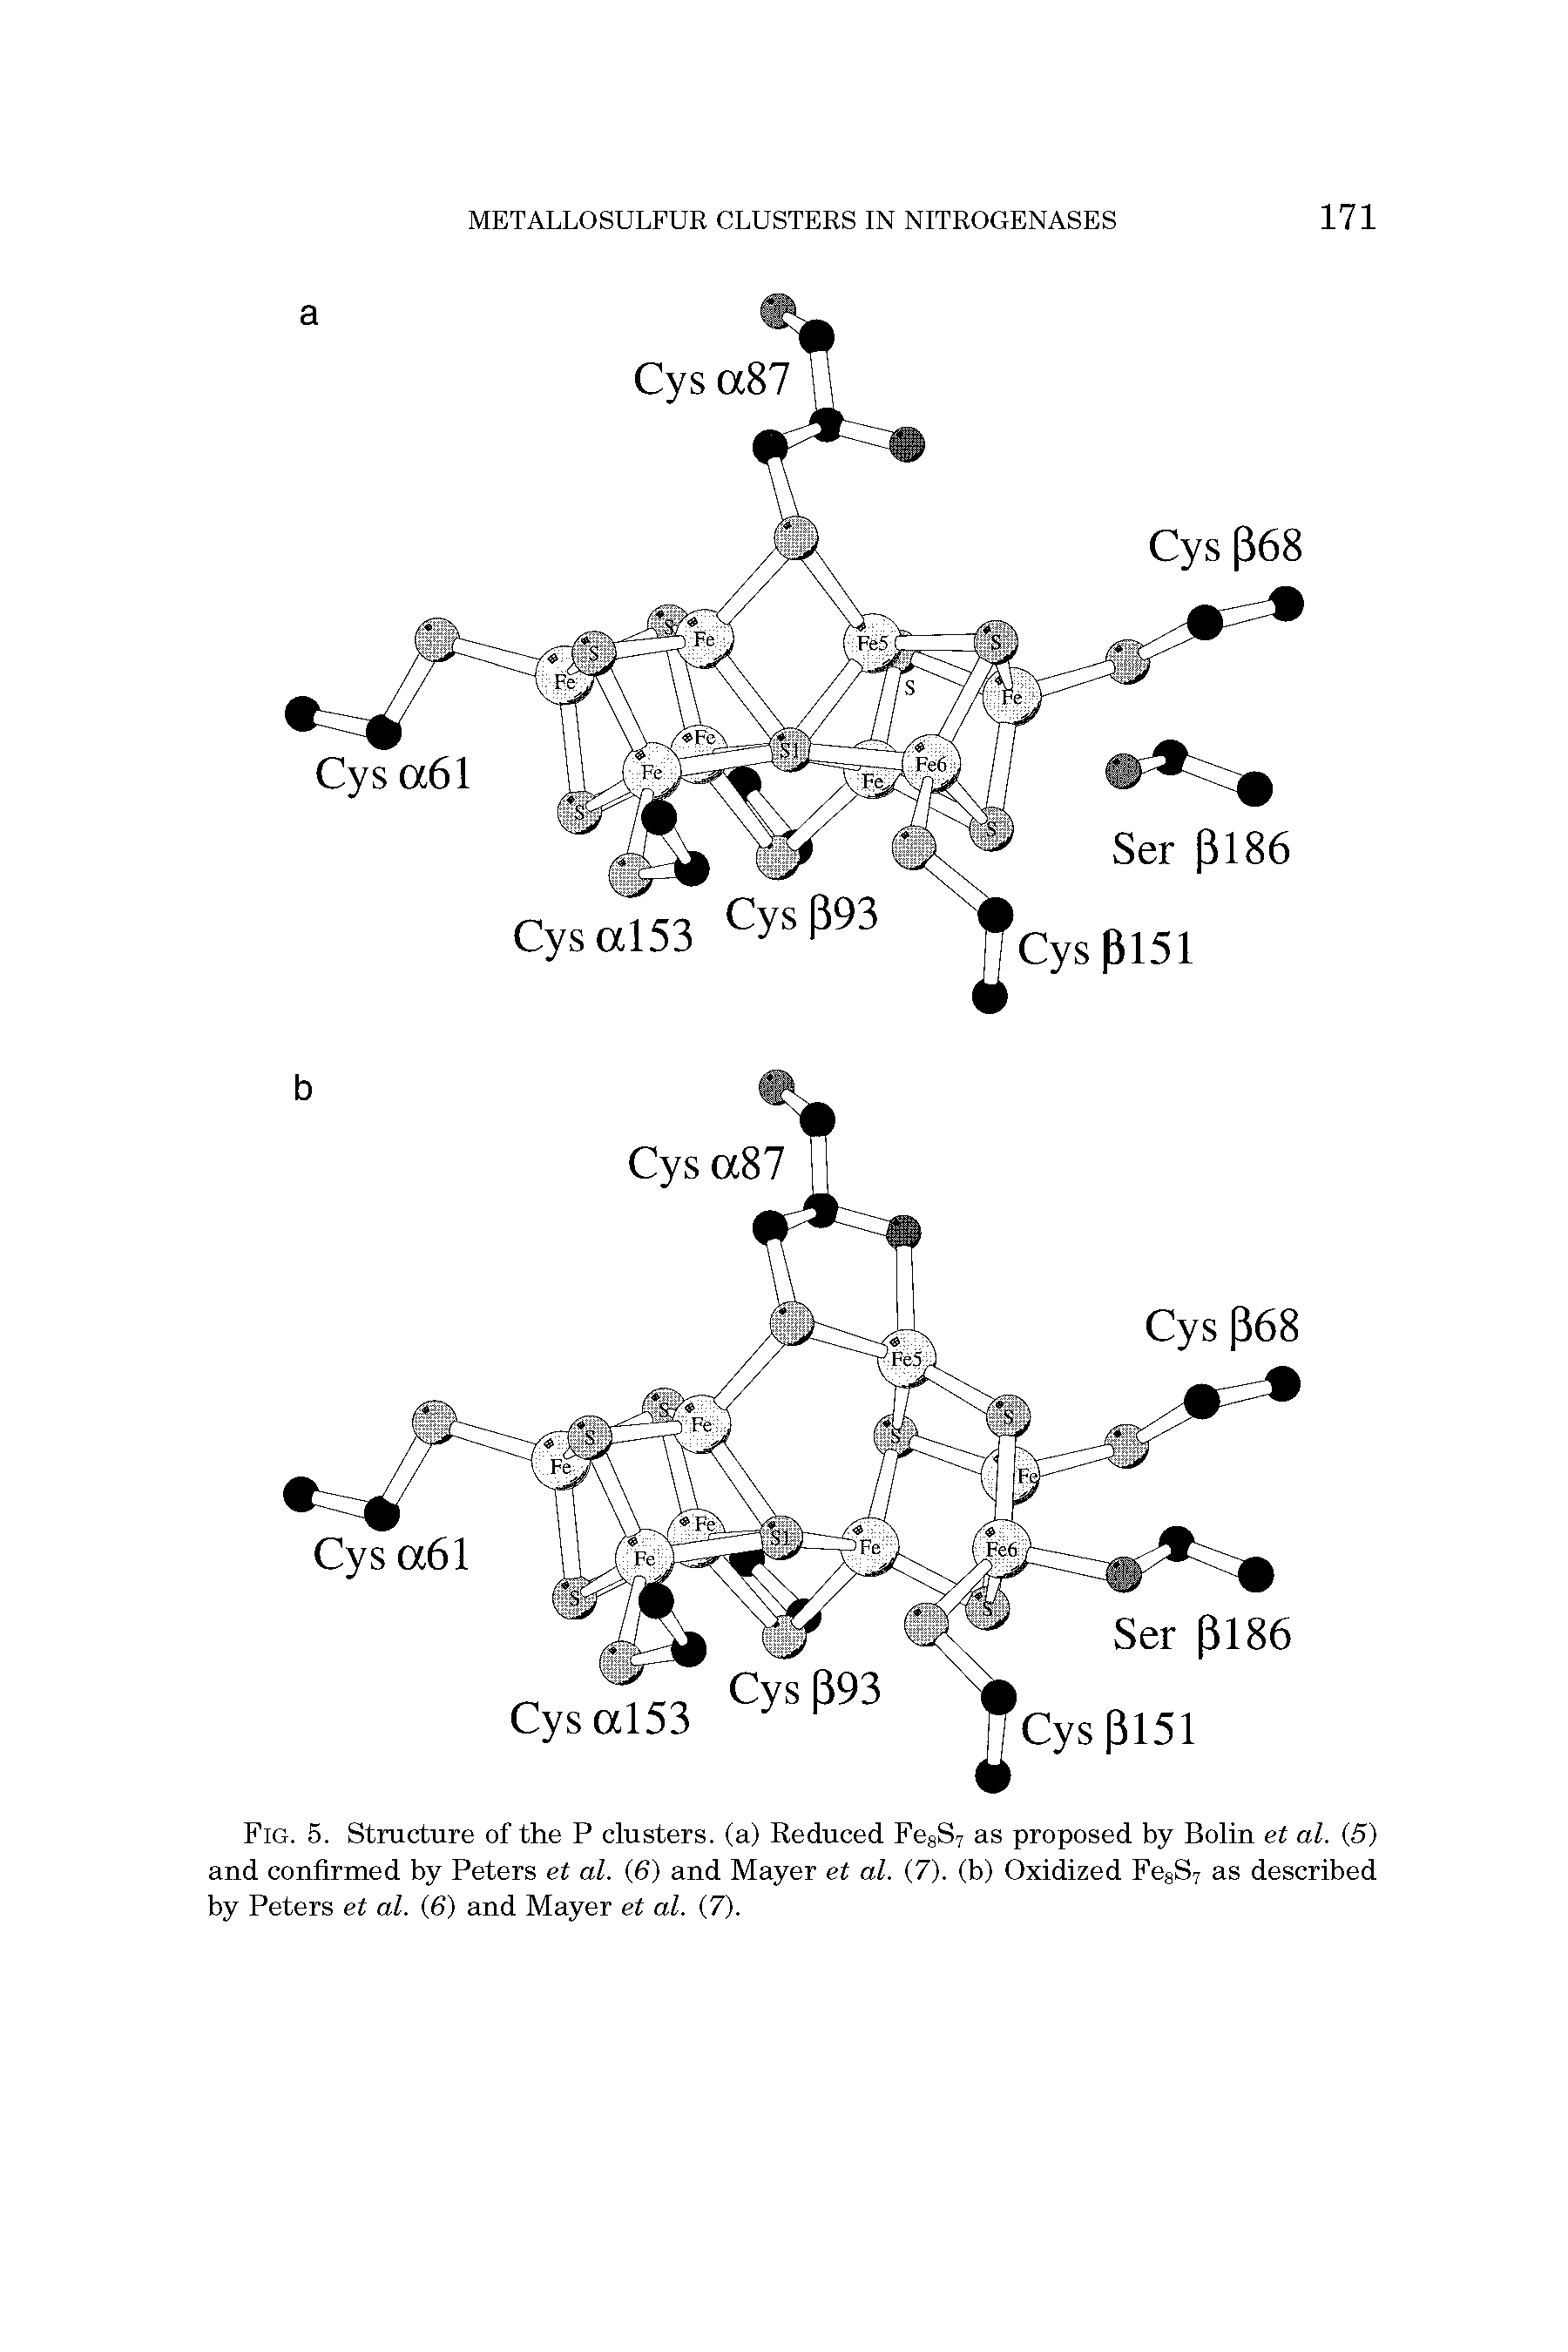 Fig. 5. Structure of the P clusters, (a) Reduced FesSy as proposed by Bolin et al. (5) and confirmed by Peters et al. (6) and Mayer et al. (7). (b) Oxidized FesSy as described by Peters et al. (6) and Mayer et al. (7).